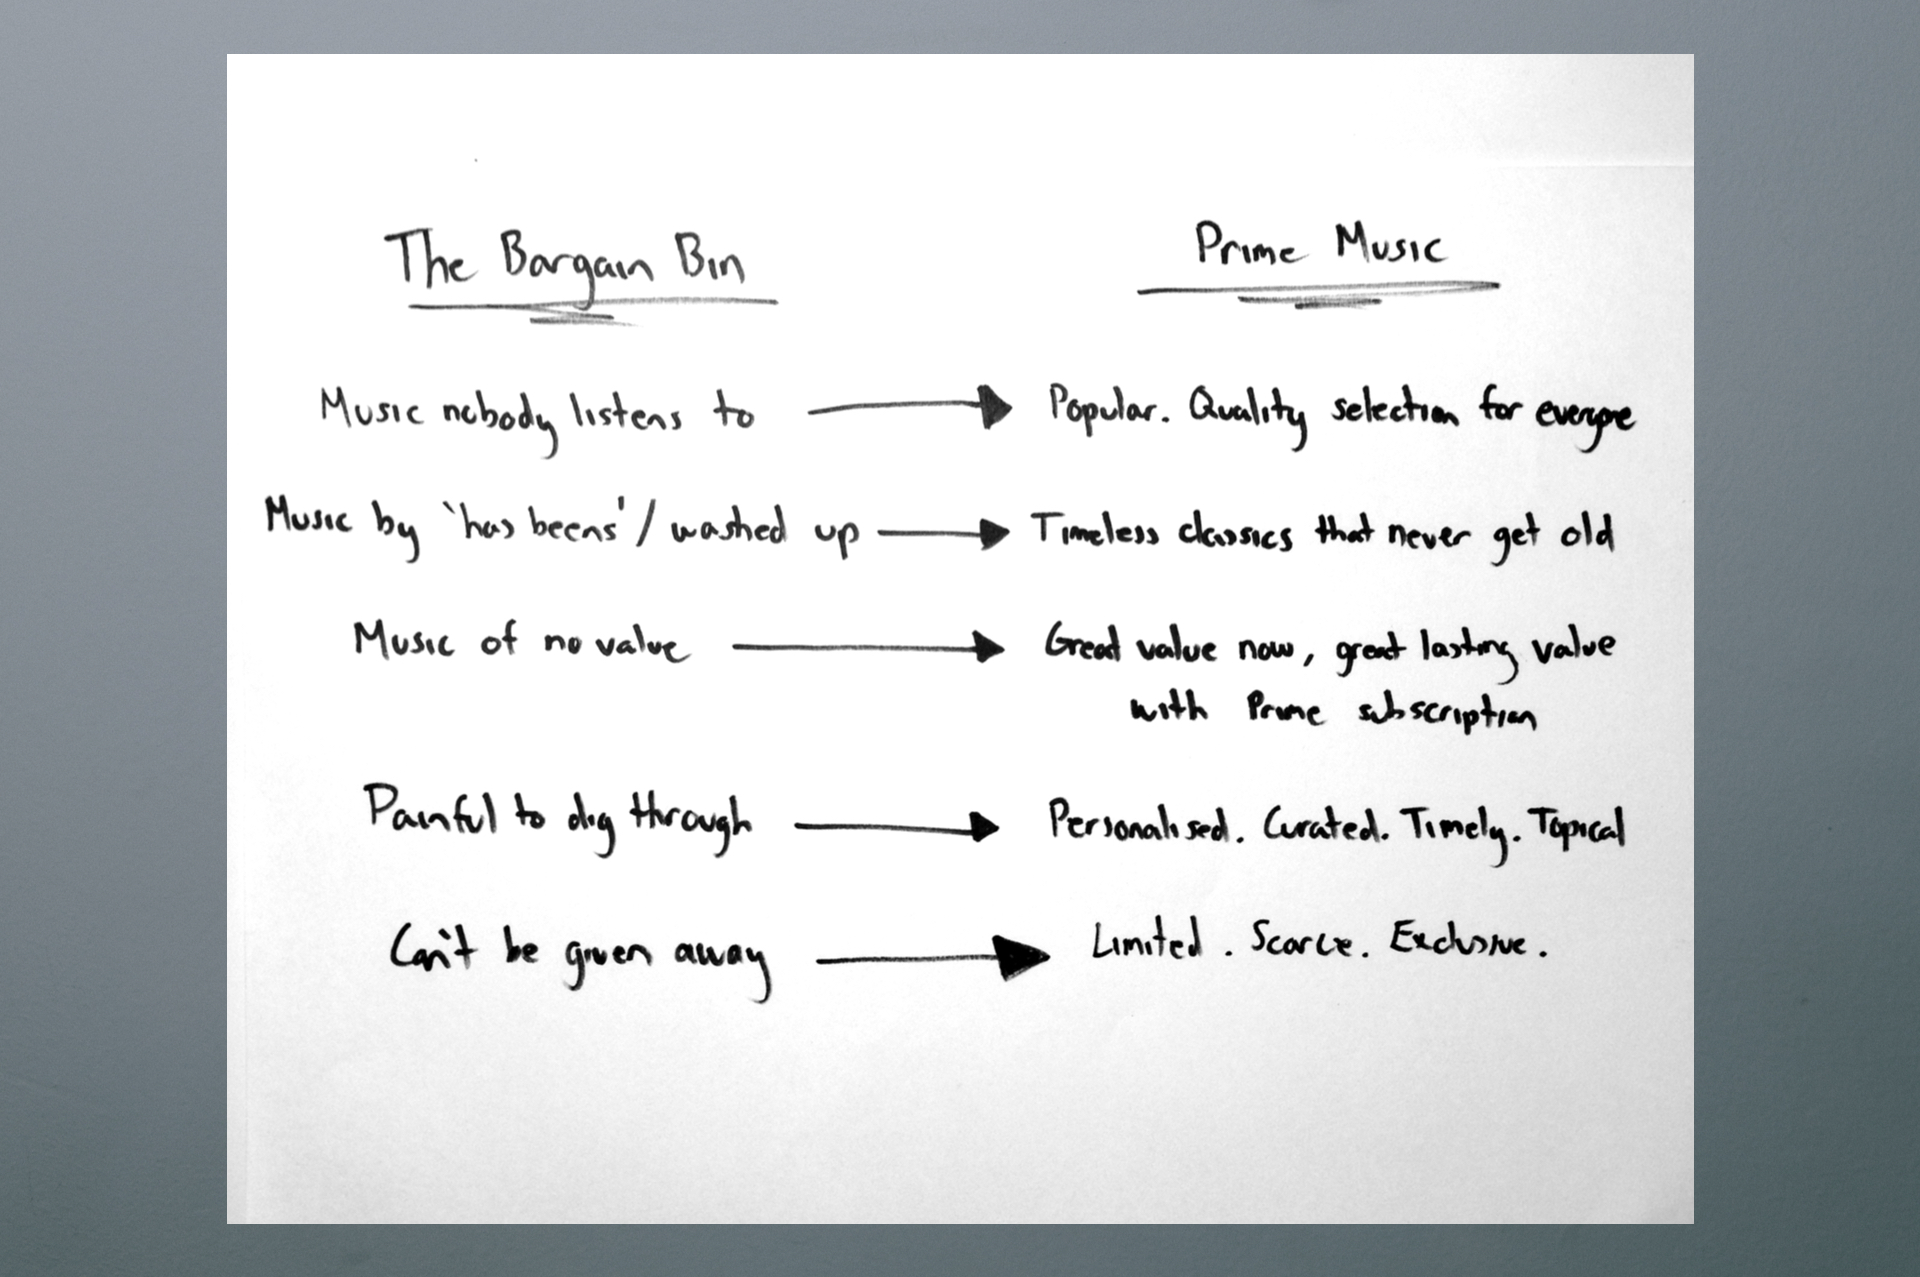 A piece of paper showing two columns 'The Bargain Bin' and 'Prime Music'. The columns connect pairs of traits from 'the bargain bin' to the opposite trait in 'Prime Music'. These pairs of traits include 'music nobody listens to' and 'Popular, quality selection for everyone'; 'music by has beens' and 'timeless classics that never get old'; 'music of no value' and 'great value now, great lasting value with Prime membership'; painful to dig through' and 'personalised, curated, topical and timely'; 'Can't be given away' and 'limited, scarce, exclusive'.